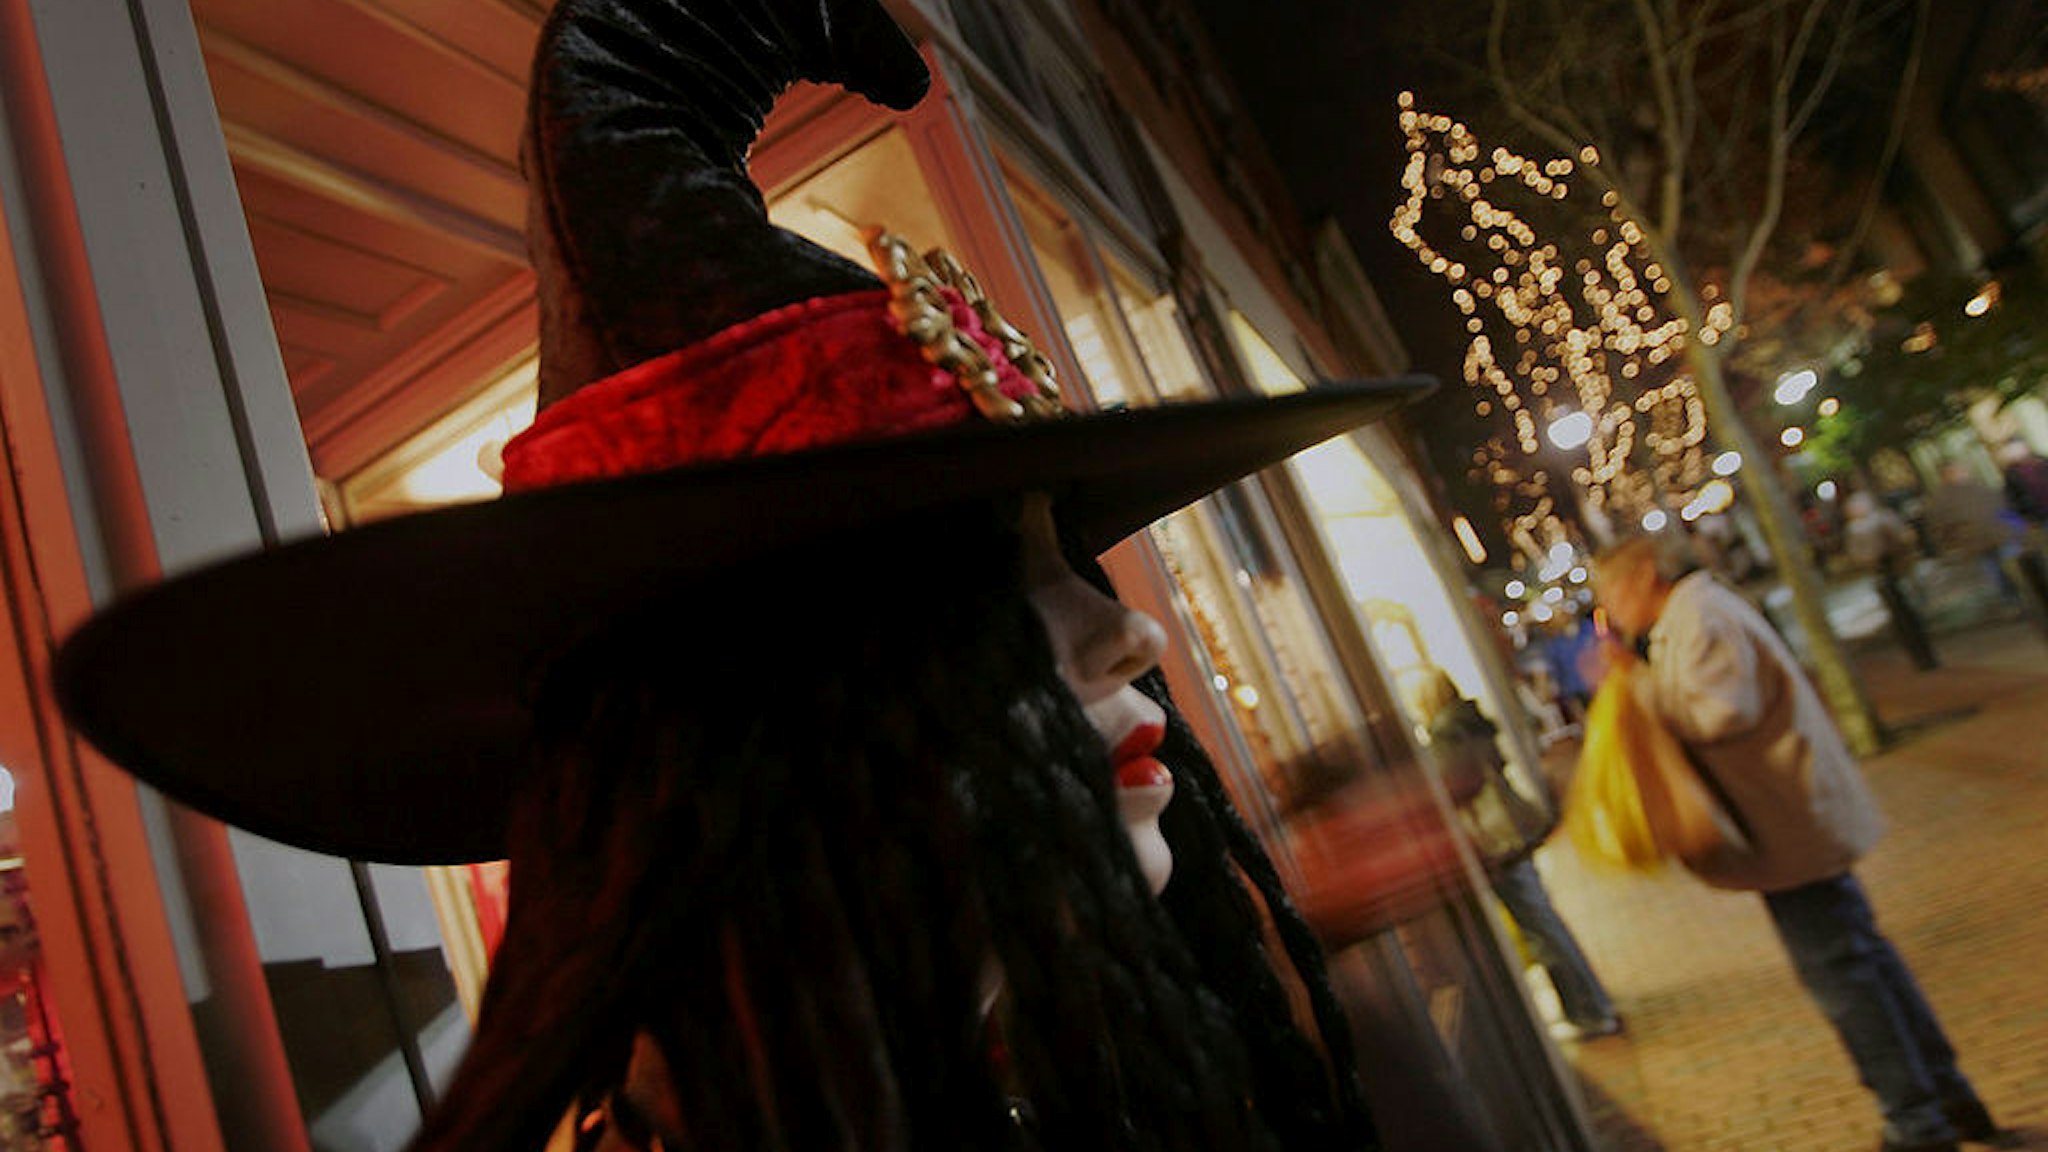 A Halloween costume is seen on a mannequin in the main pedestrian mall in a town where, back in 1692 witch trials took place, October 27, 2005 in Salem, Massachusetts. Thousands of tourists come to attend the large Halloween festival. (Photo by Joe Raedle/Getty Images)